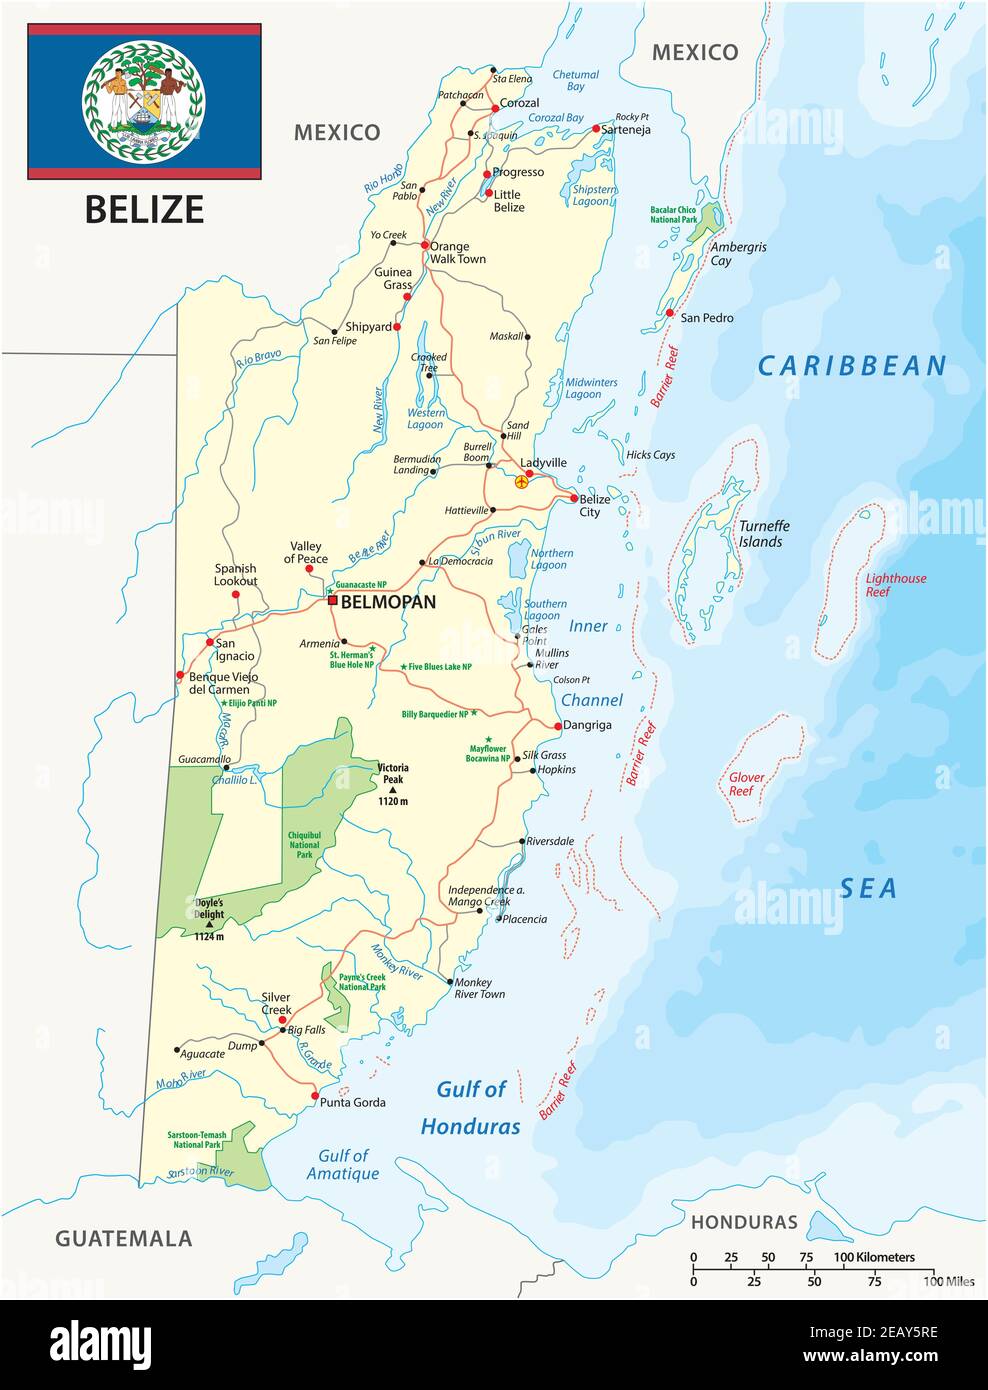 Road and national park map of the central american state belize Stock Vector